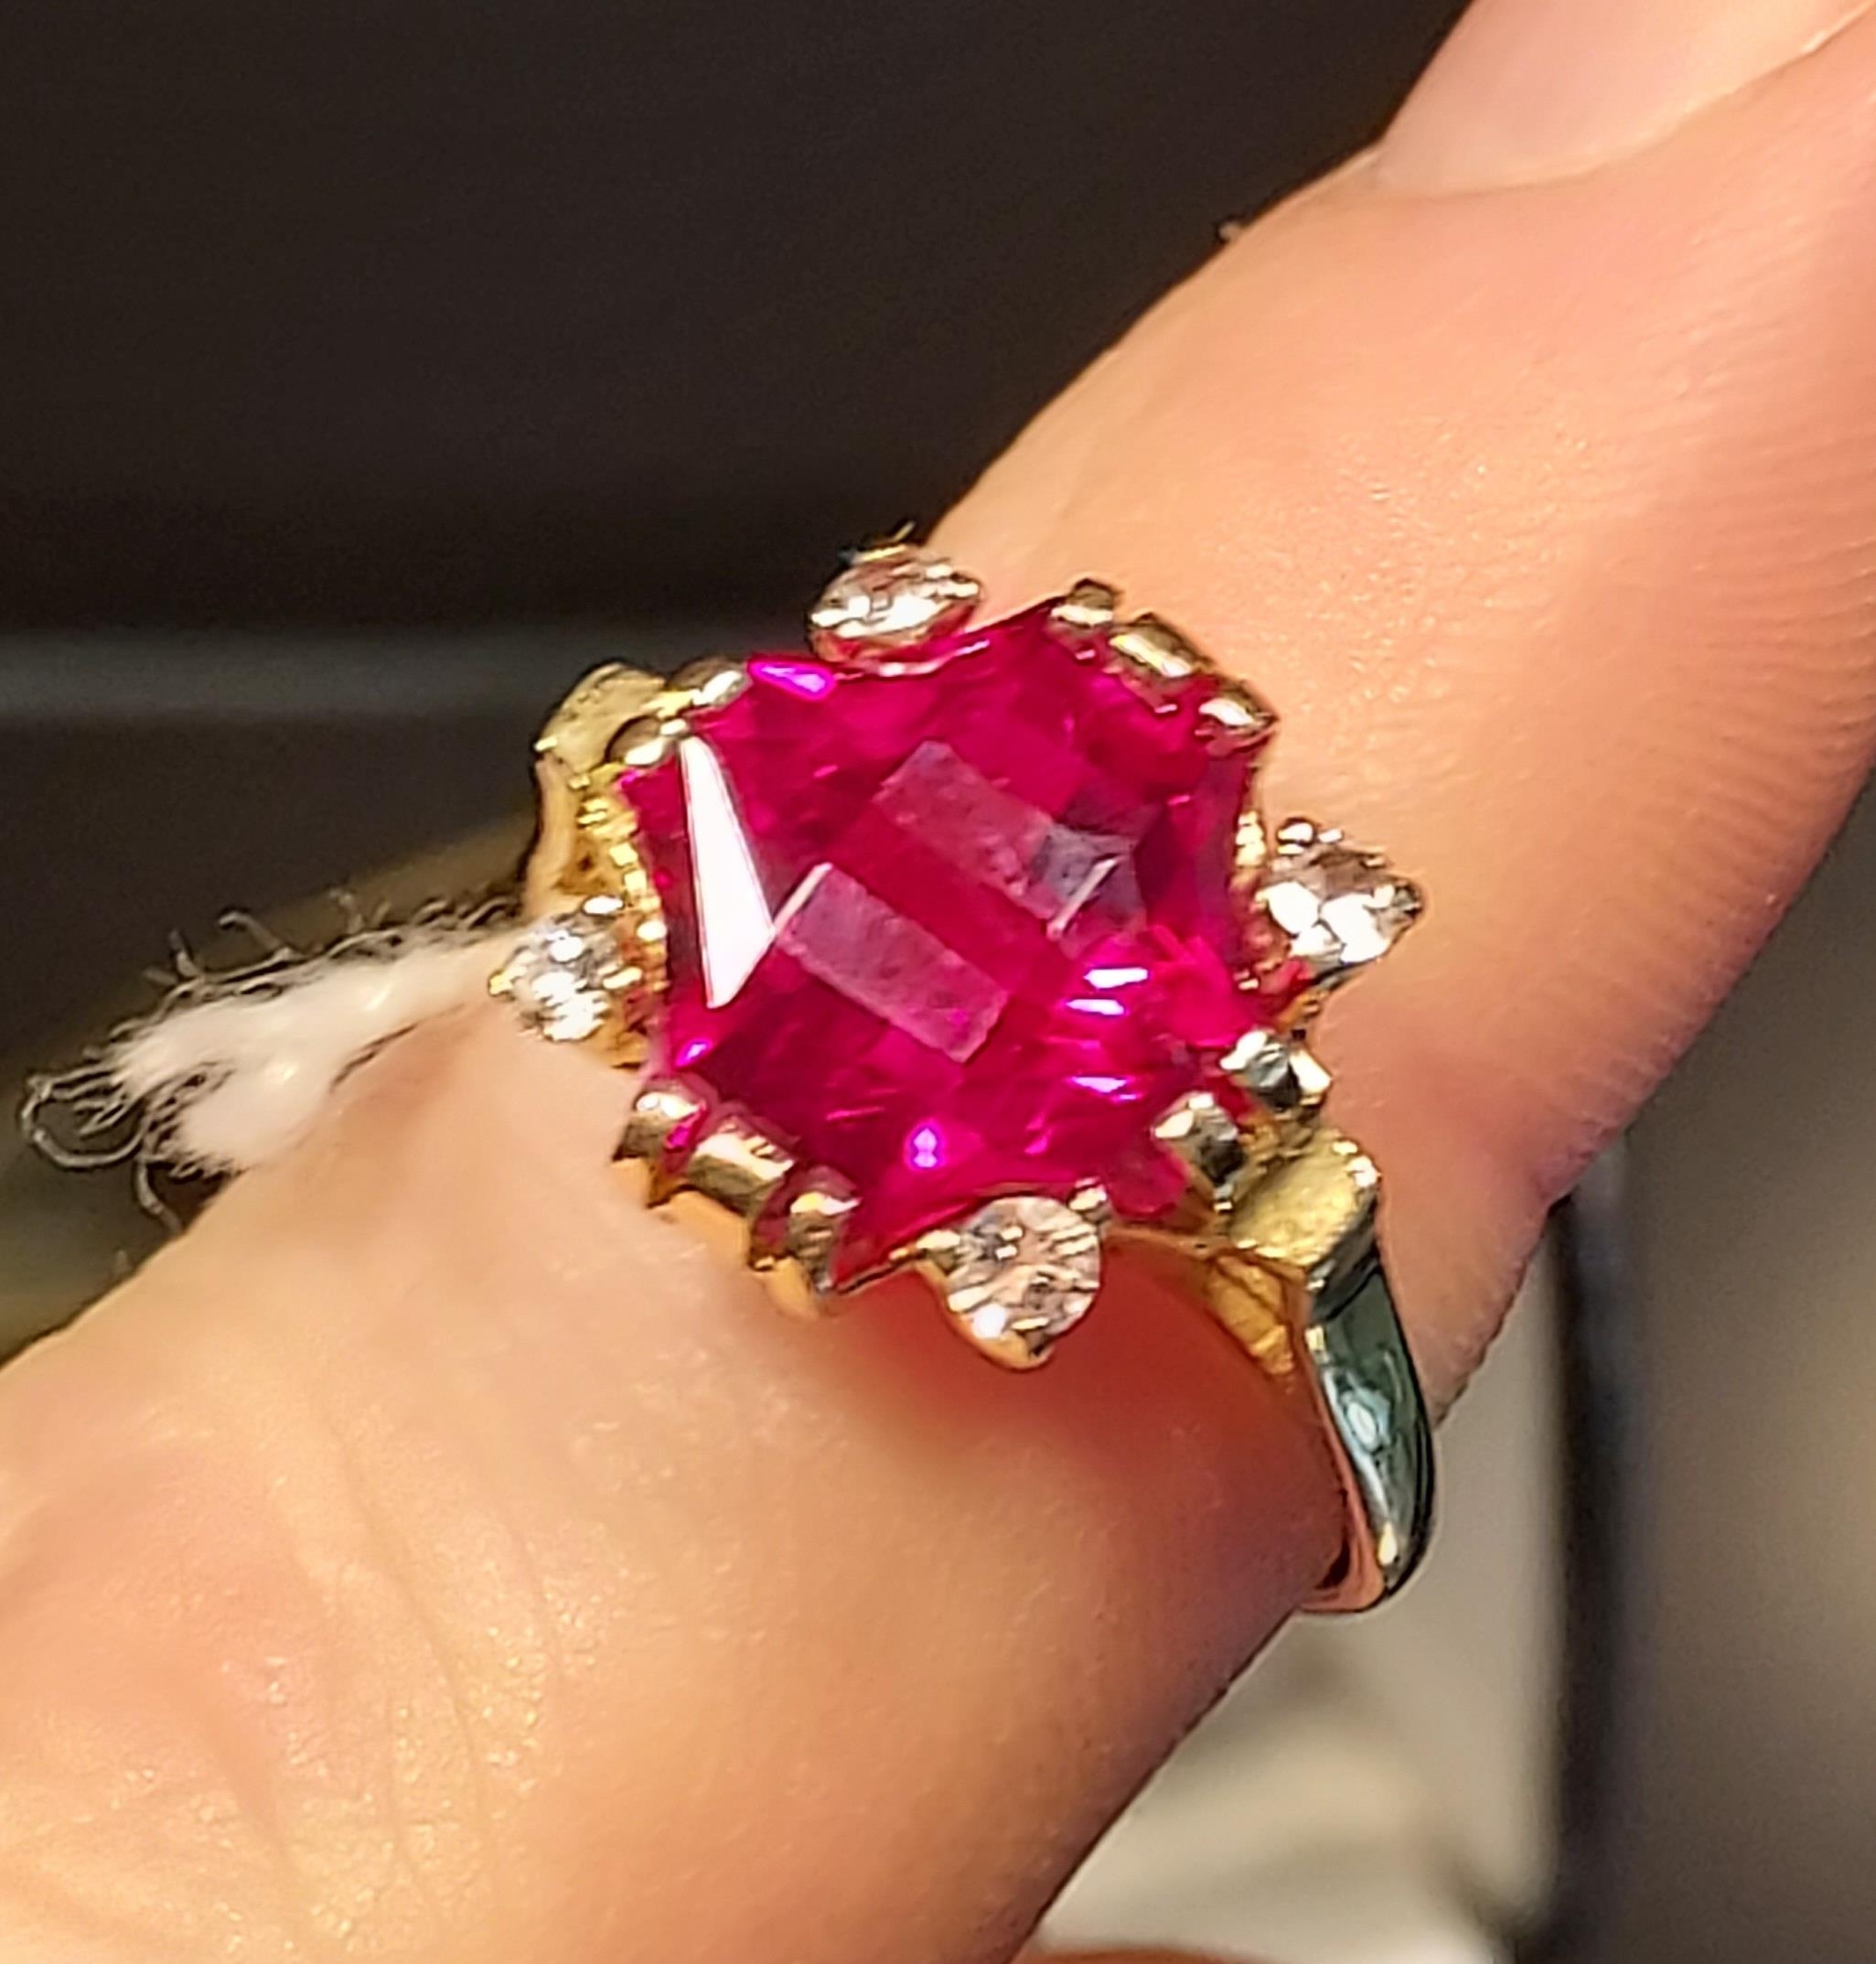 A 14ct yellow gold ring set with a large cut single ruby and four white spinel stones. [Ring size R] - Image 3 of 3